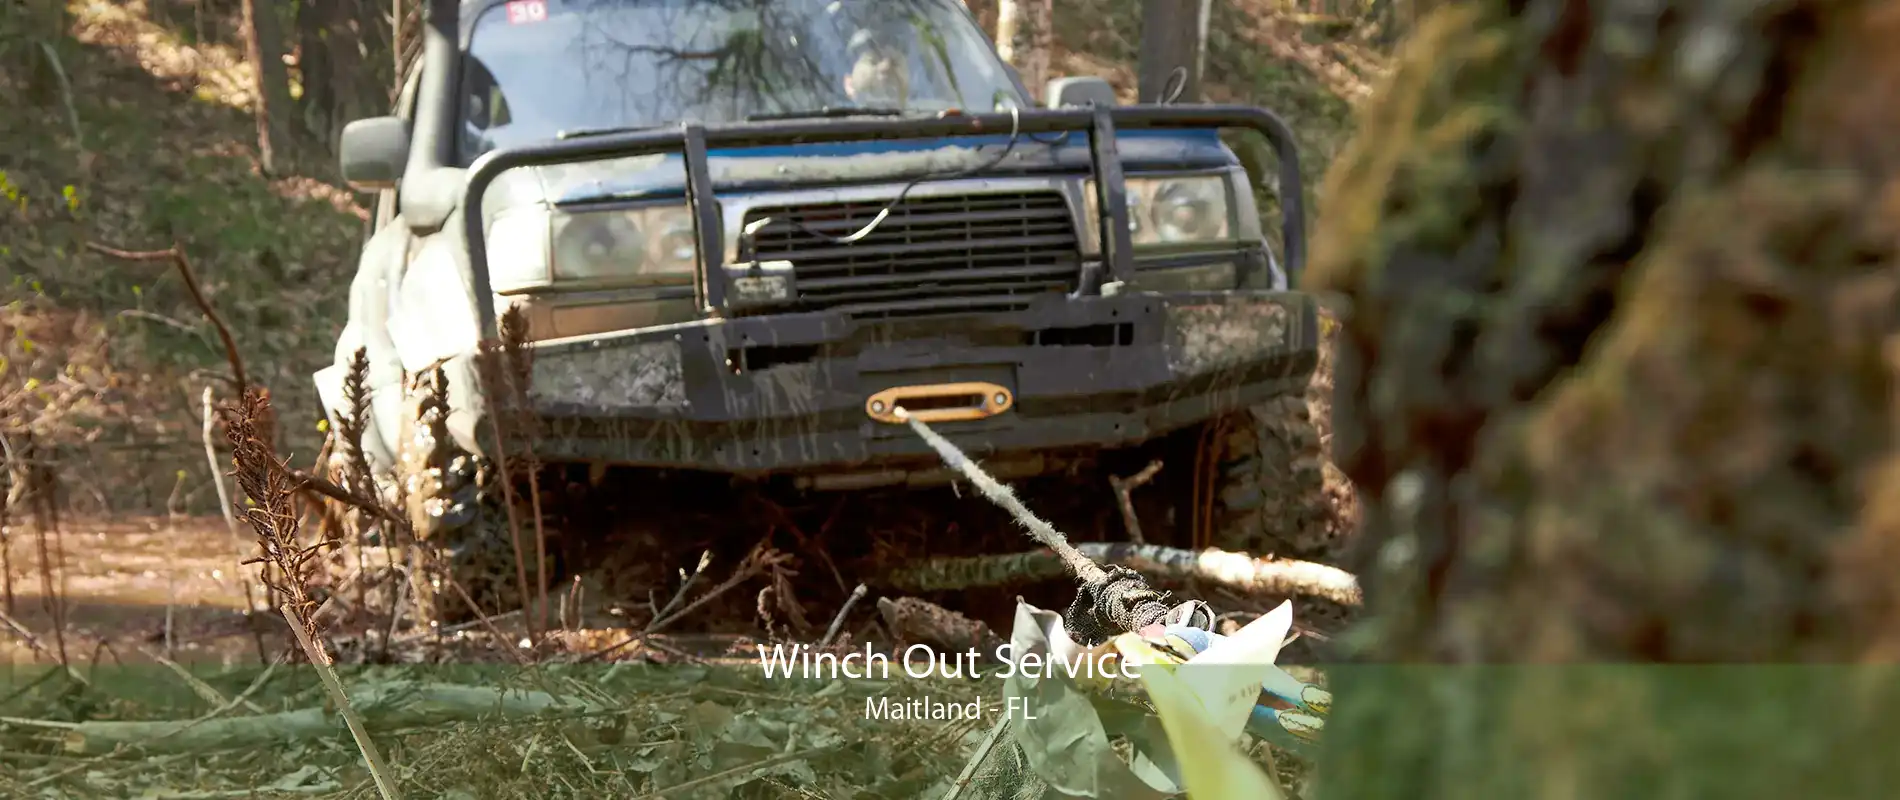 Winch Out Service Maitland - FL